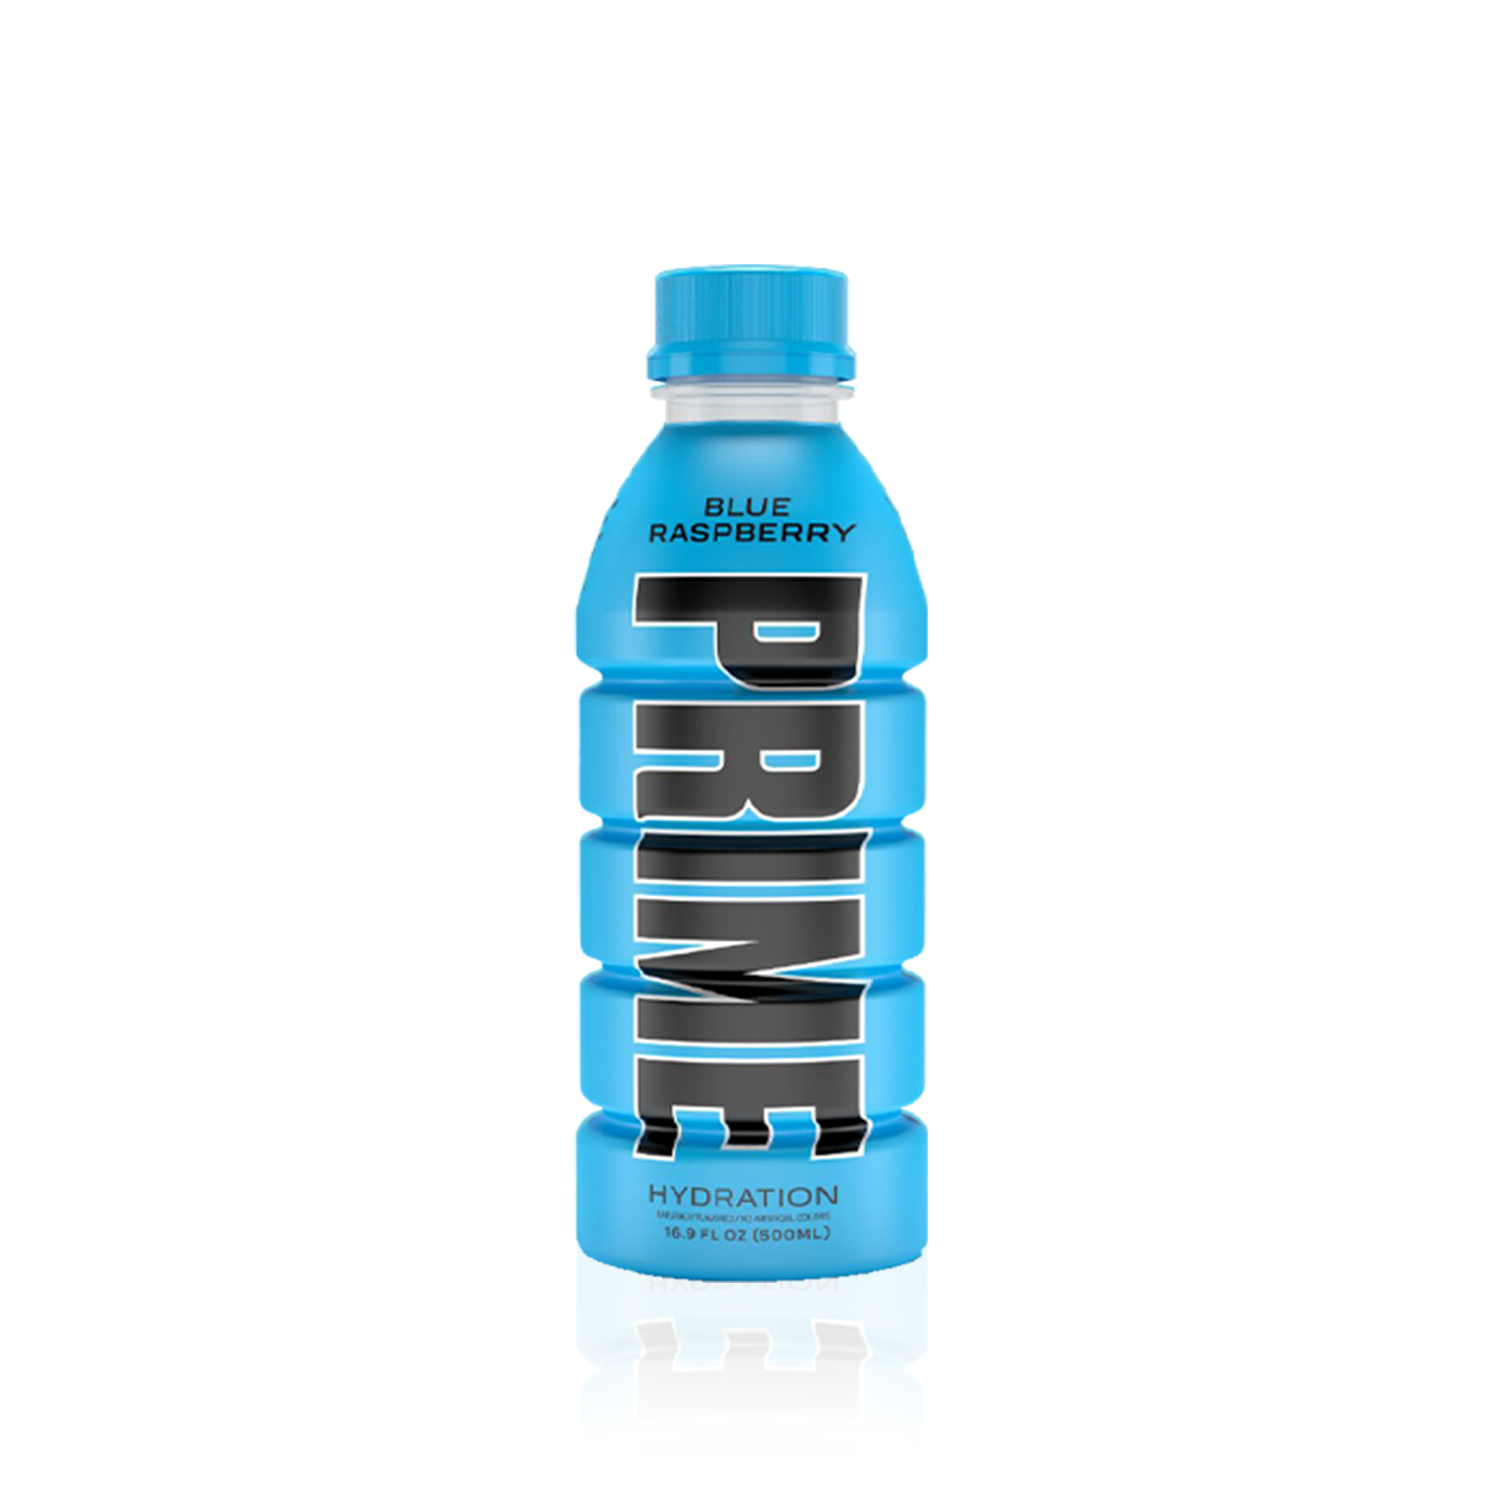 Prime Hydration Drink “Blue Raspberry” – Foreign Flavorz